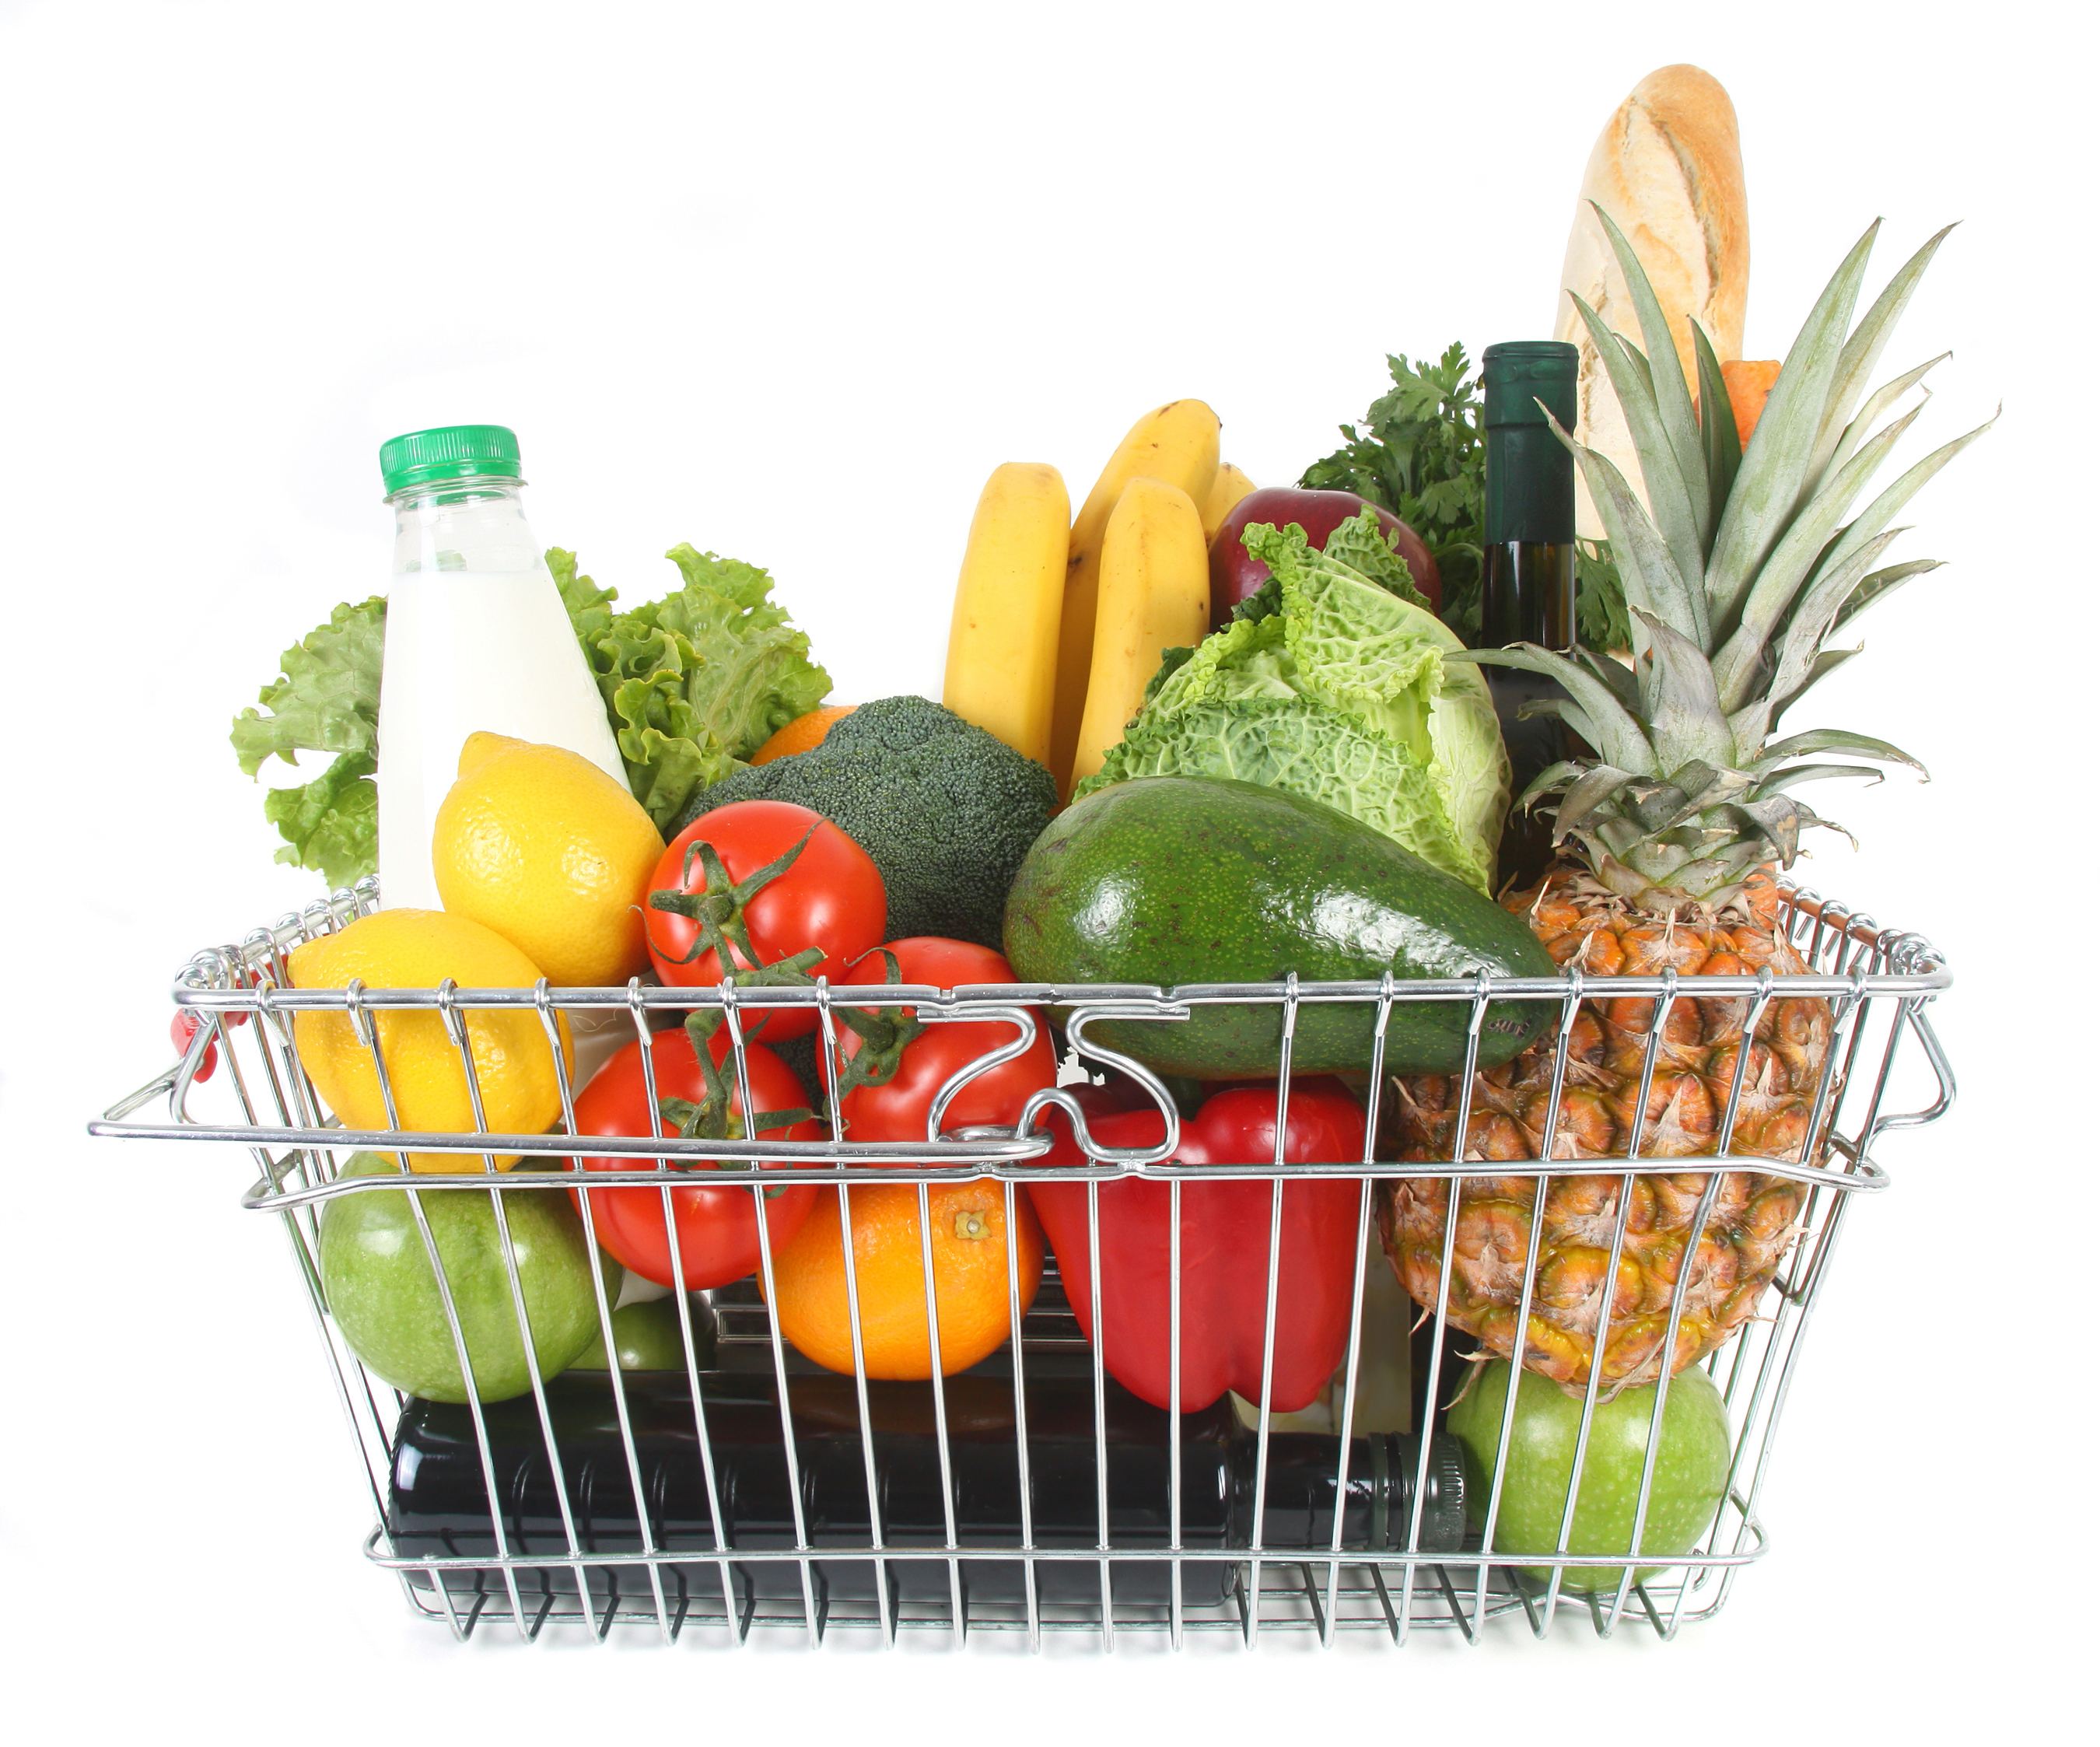 Food Basket | healthy, balanced diet along with medication and other ...